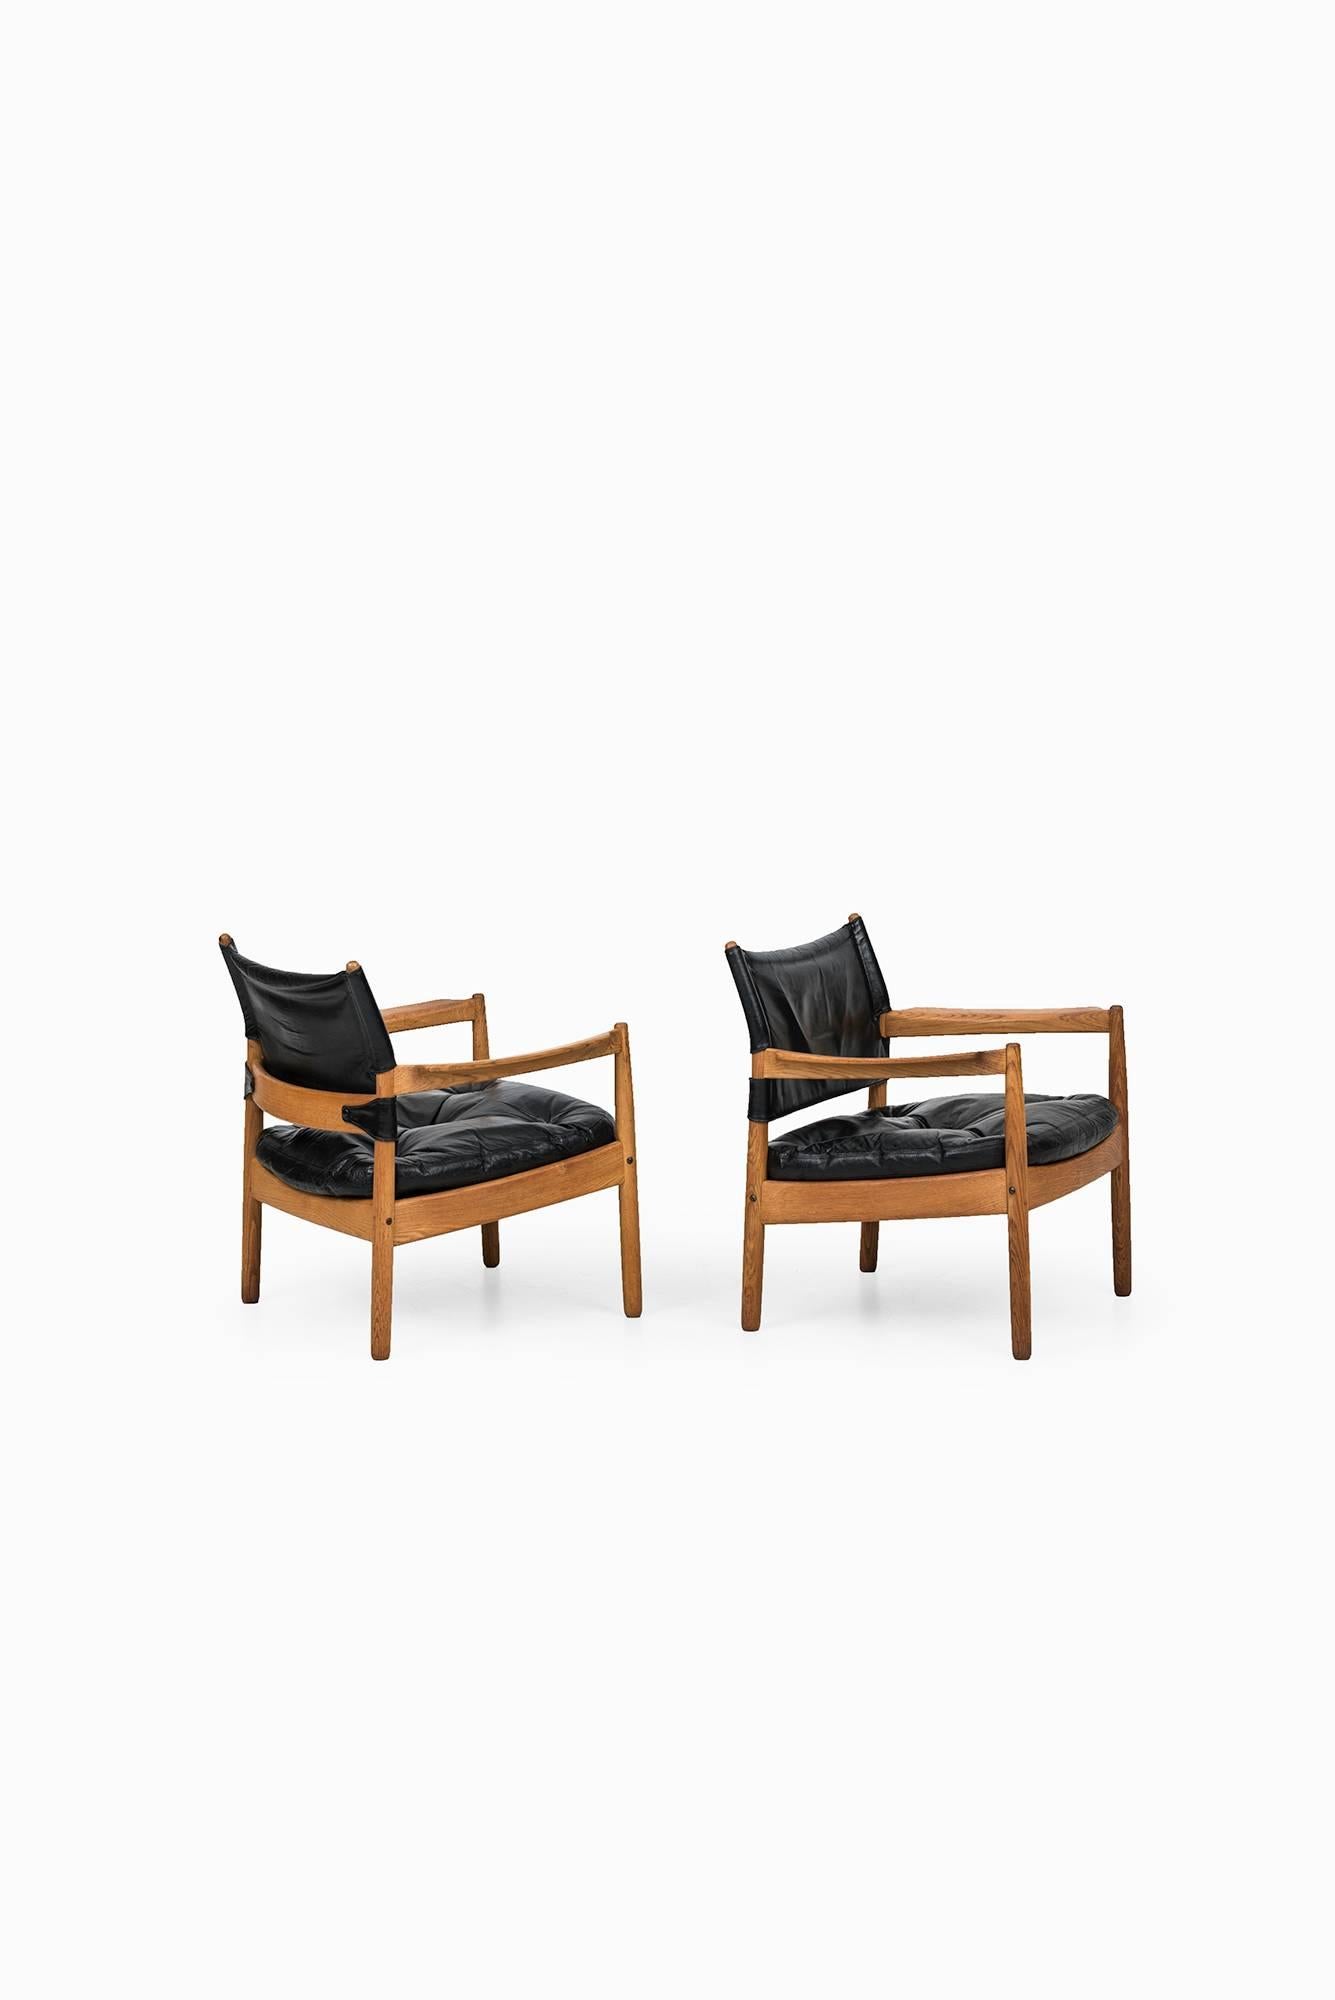 Mid-20th Century Gunnar Myrstrand Easy Chairs by Källemo in Sweden